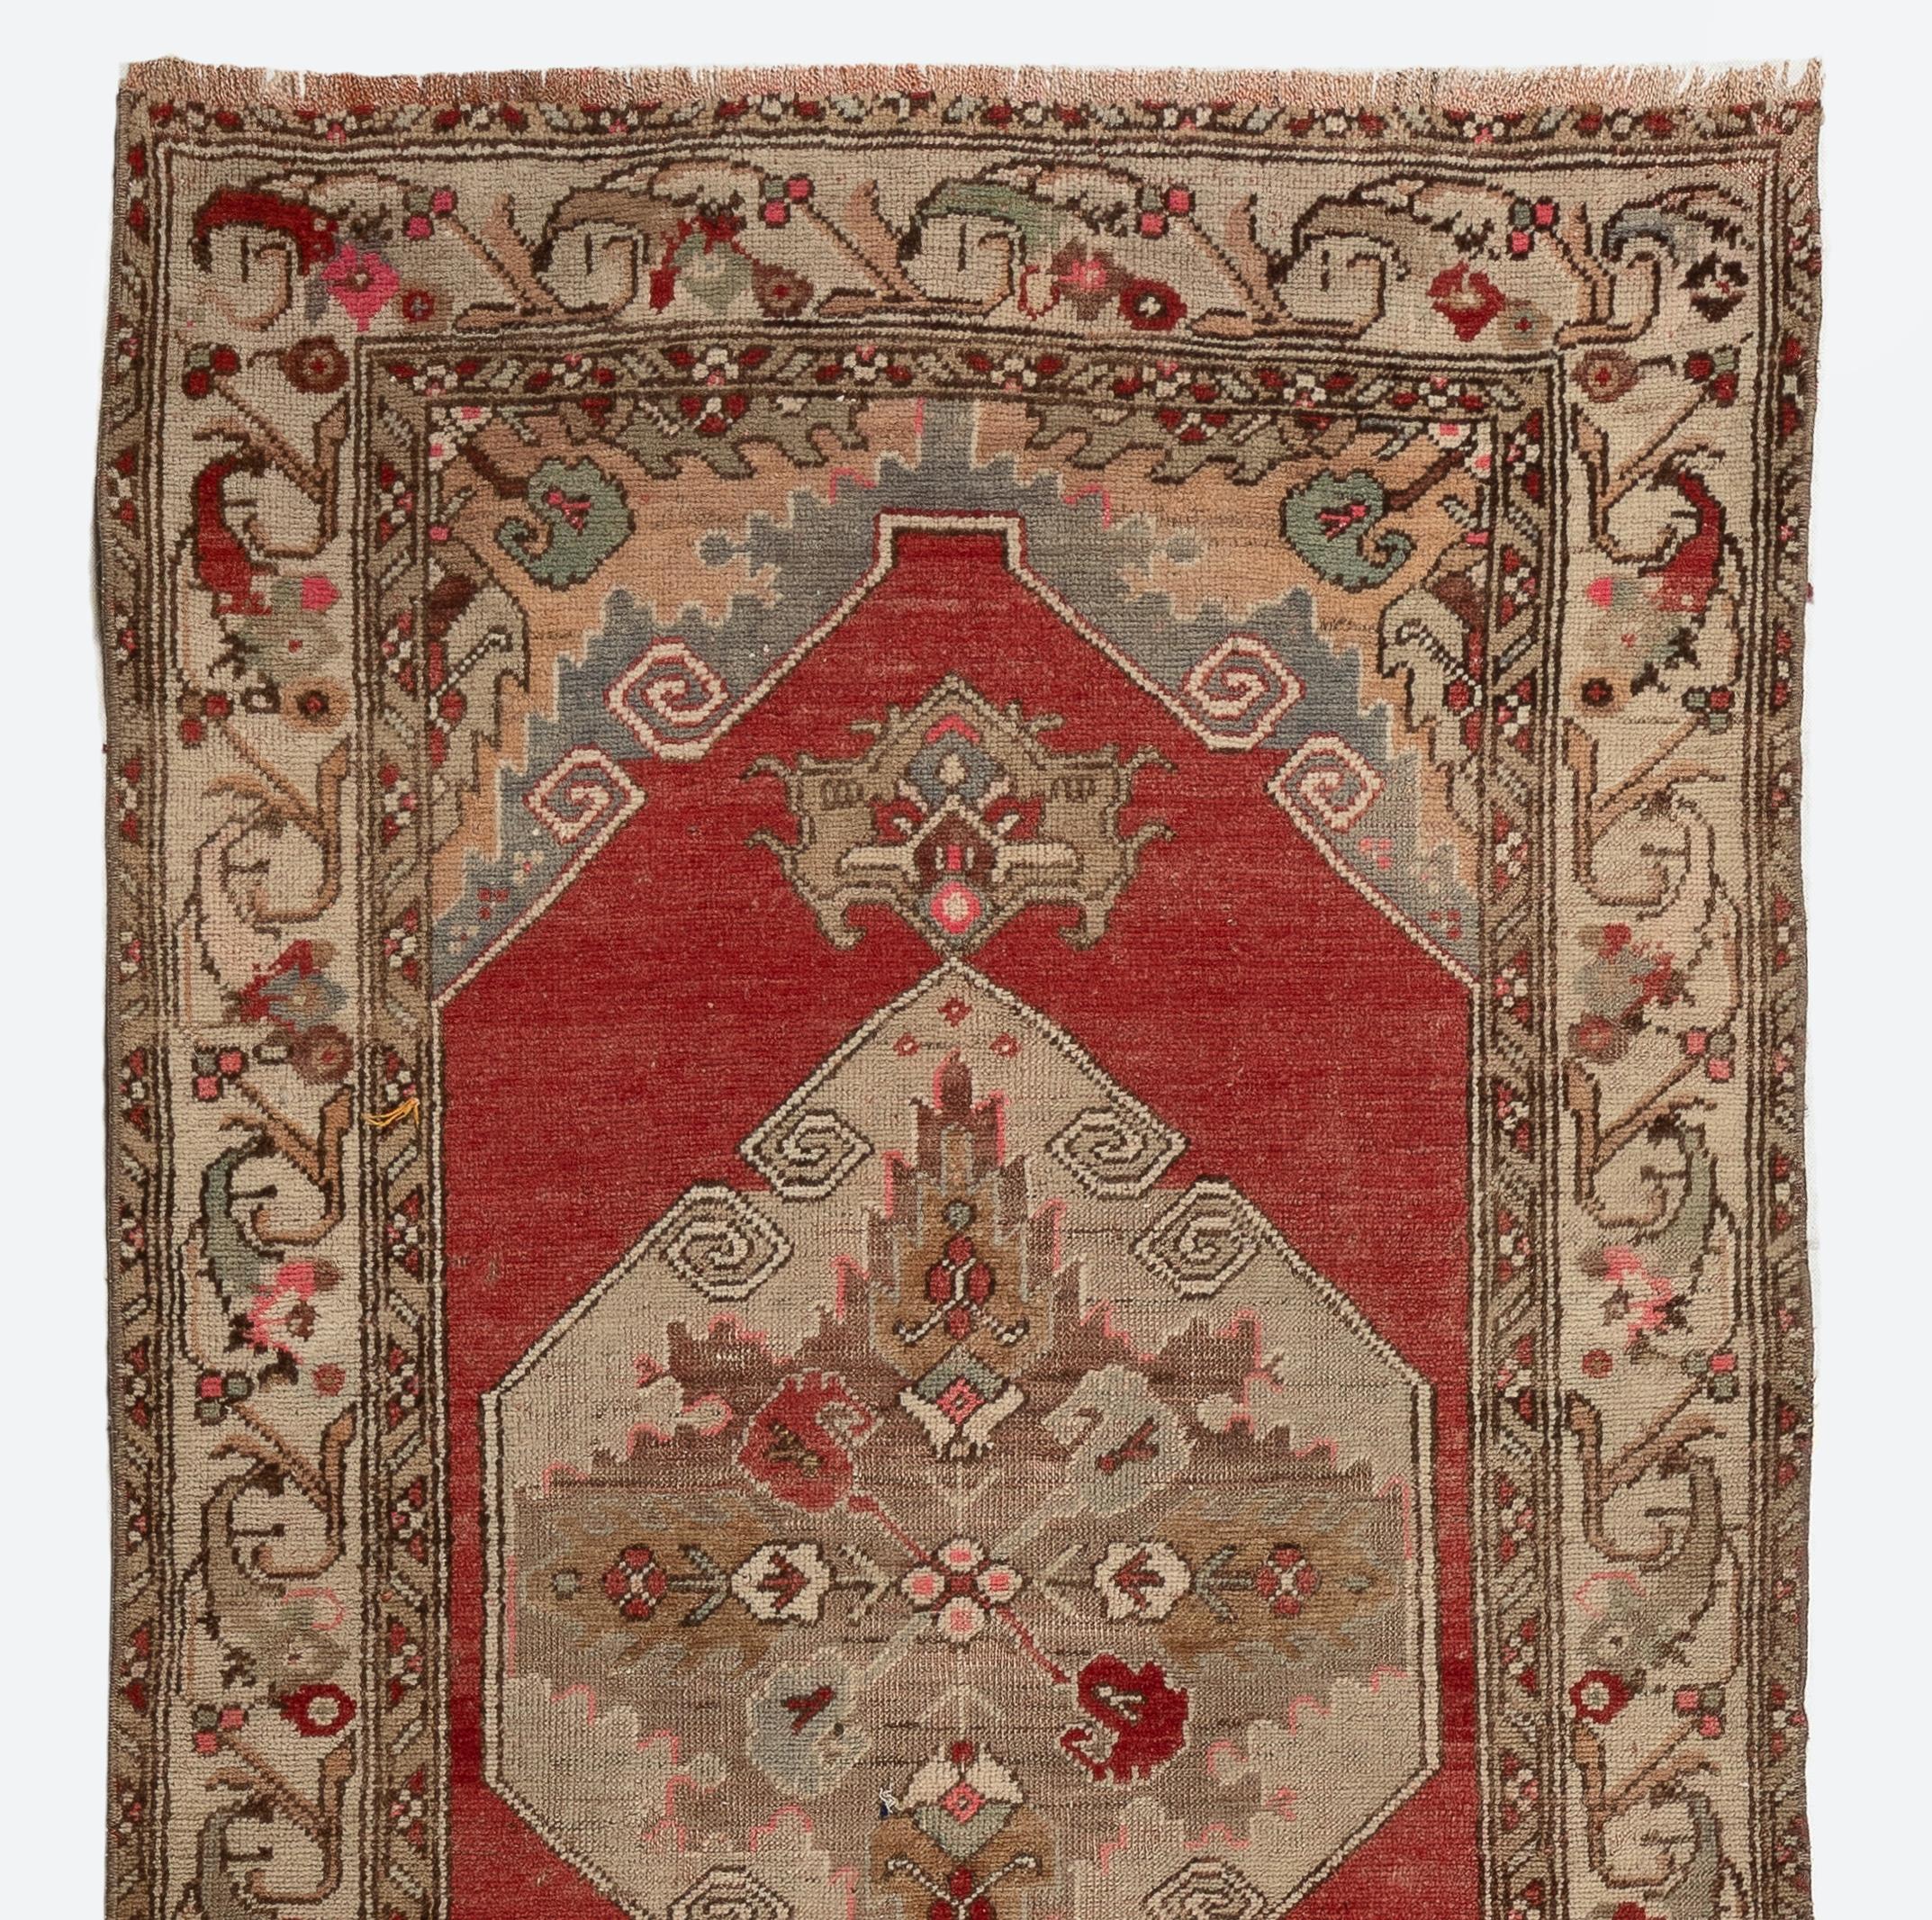 An antique hand-knotted Turkish Oushak runner rug made in the 1920s with medium wool pile. It features multiple linked geometric medallions in a lovely nuanced color palette of taupe gray and stone beige against a vermilion red background as well as